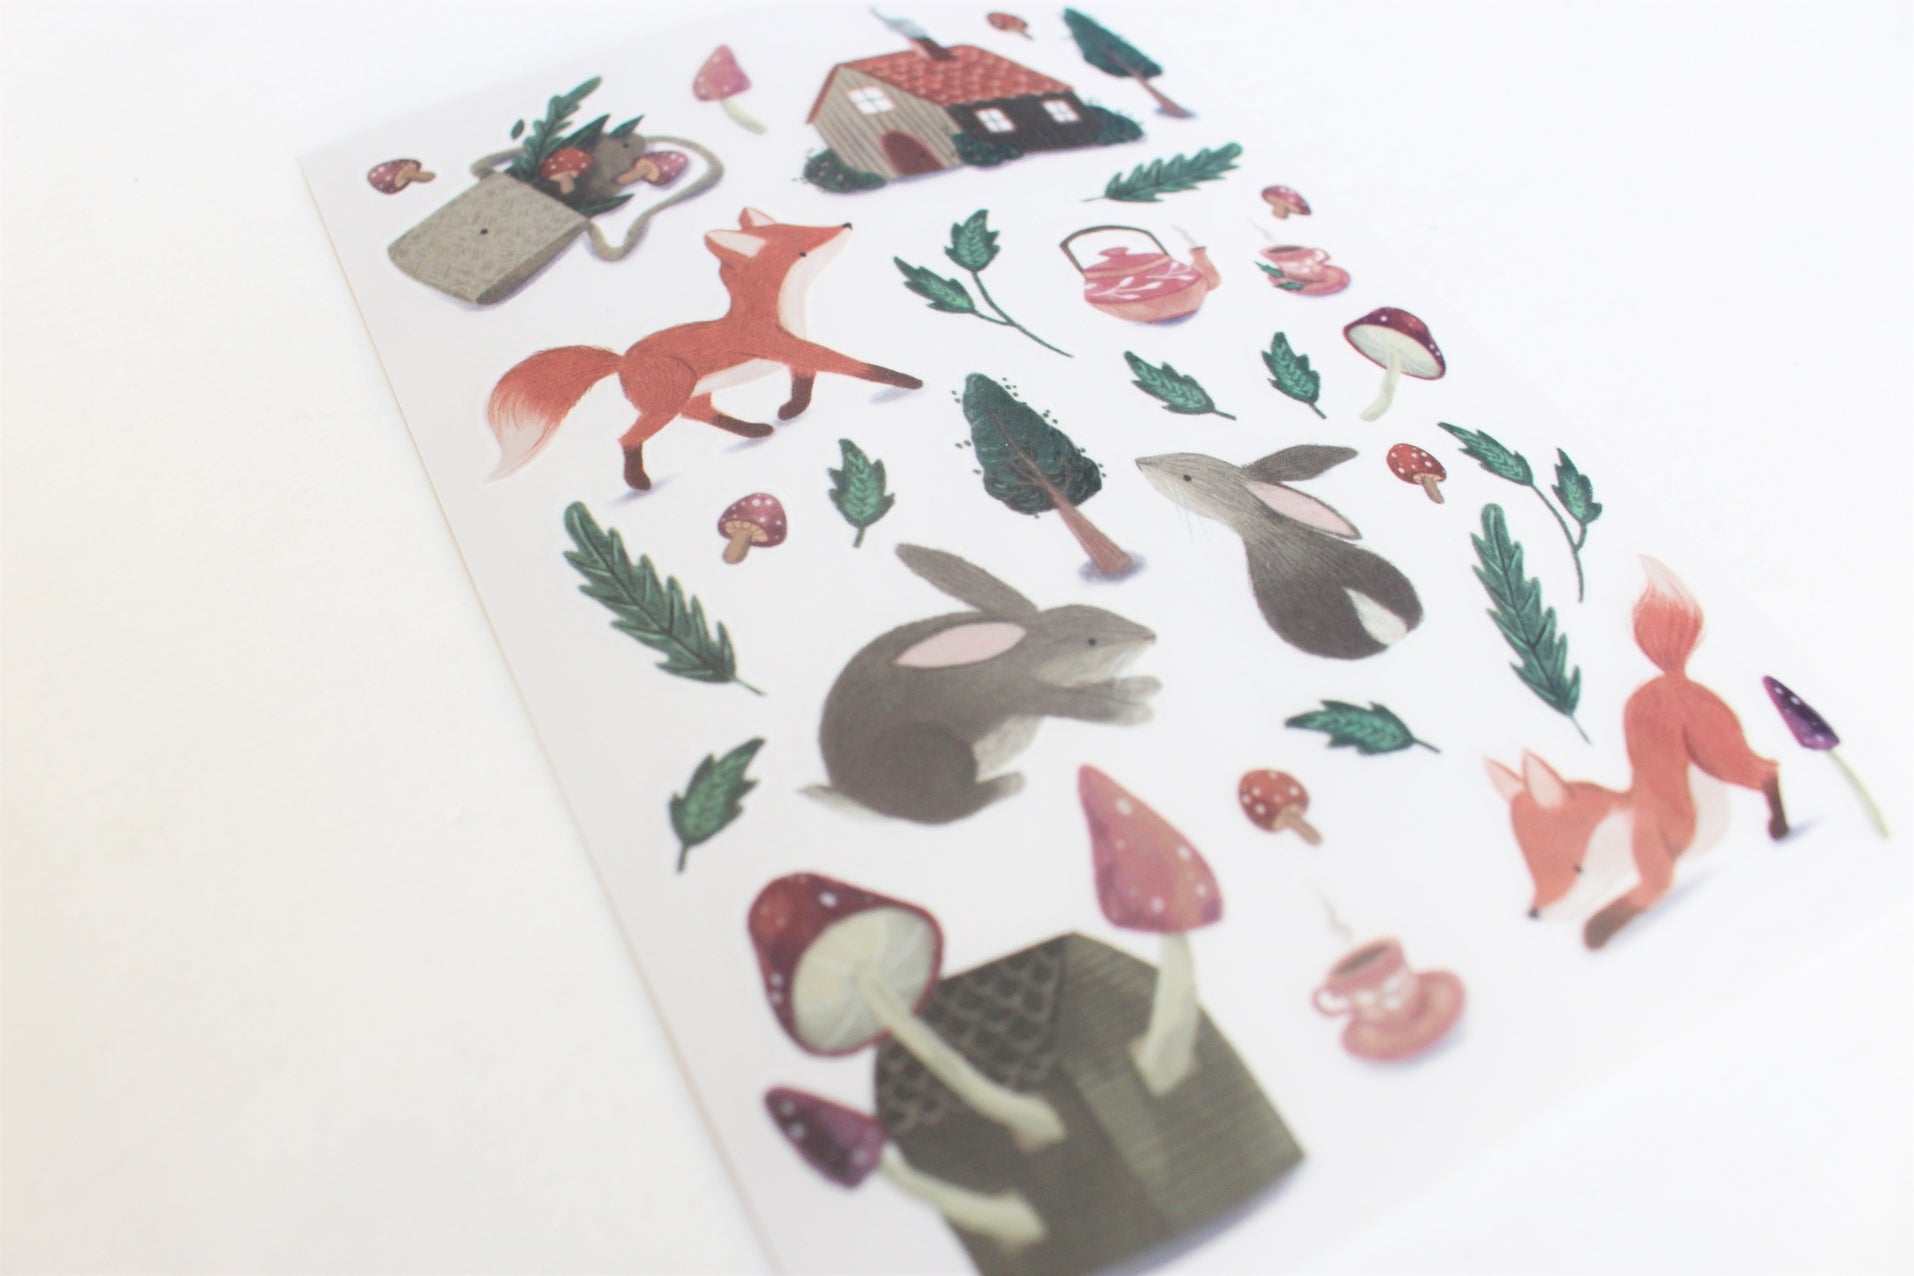 Nikki Dotti Rub on stickers -  Woodland Beautiful transfer stickers with foxes and bunnies